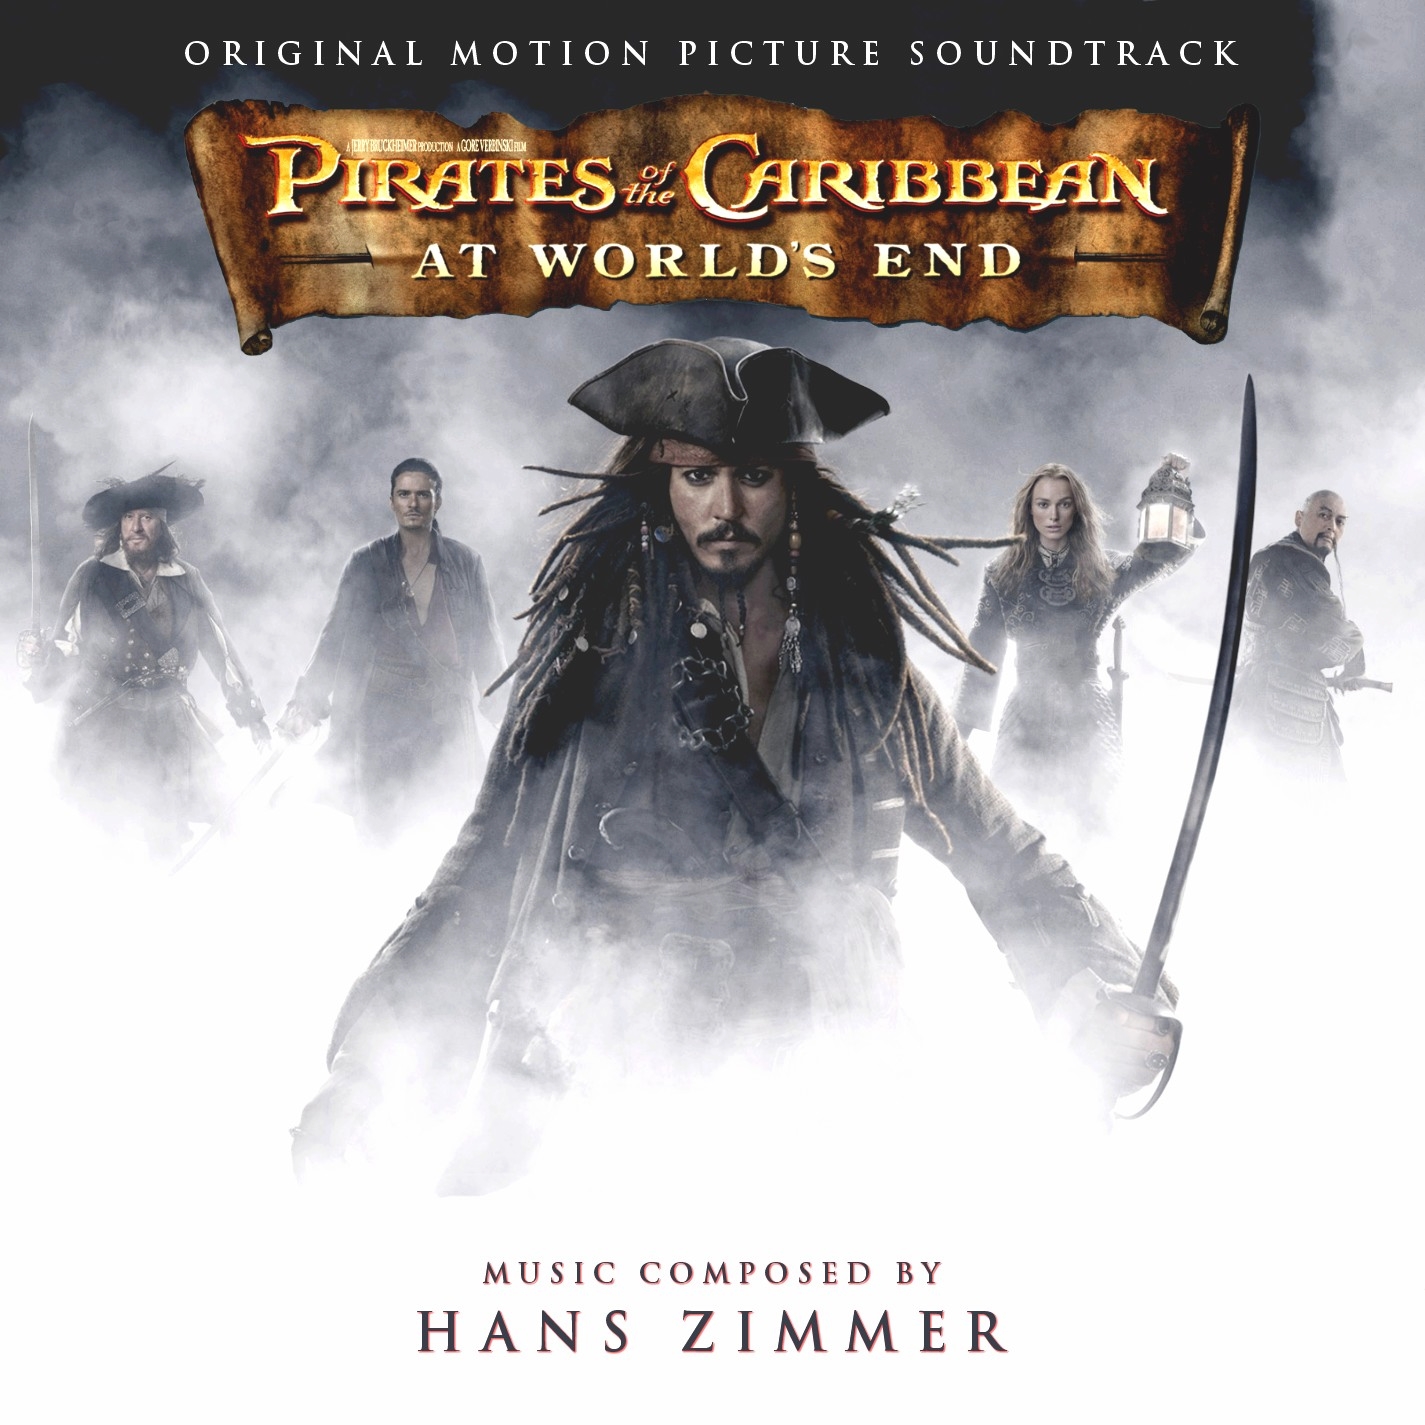 Pirates Of The Caribbean: At World's End #1